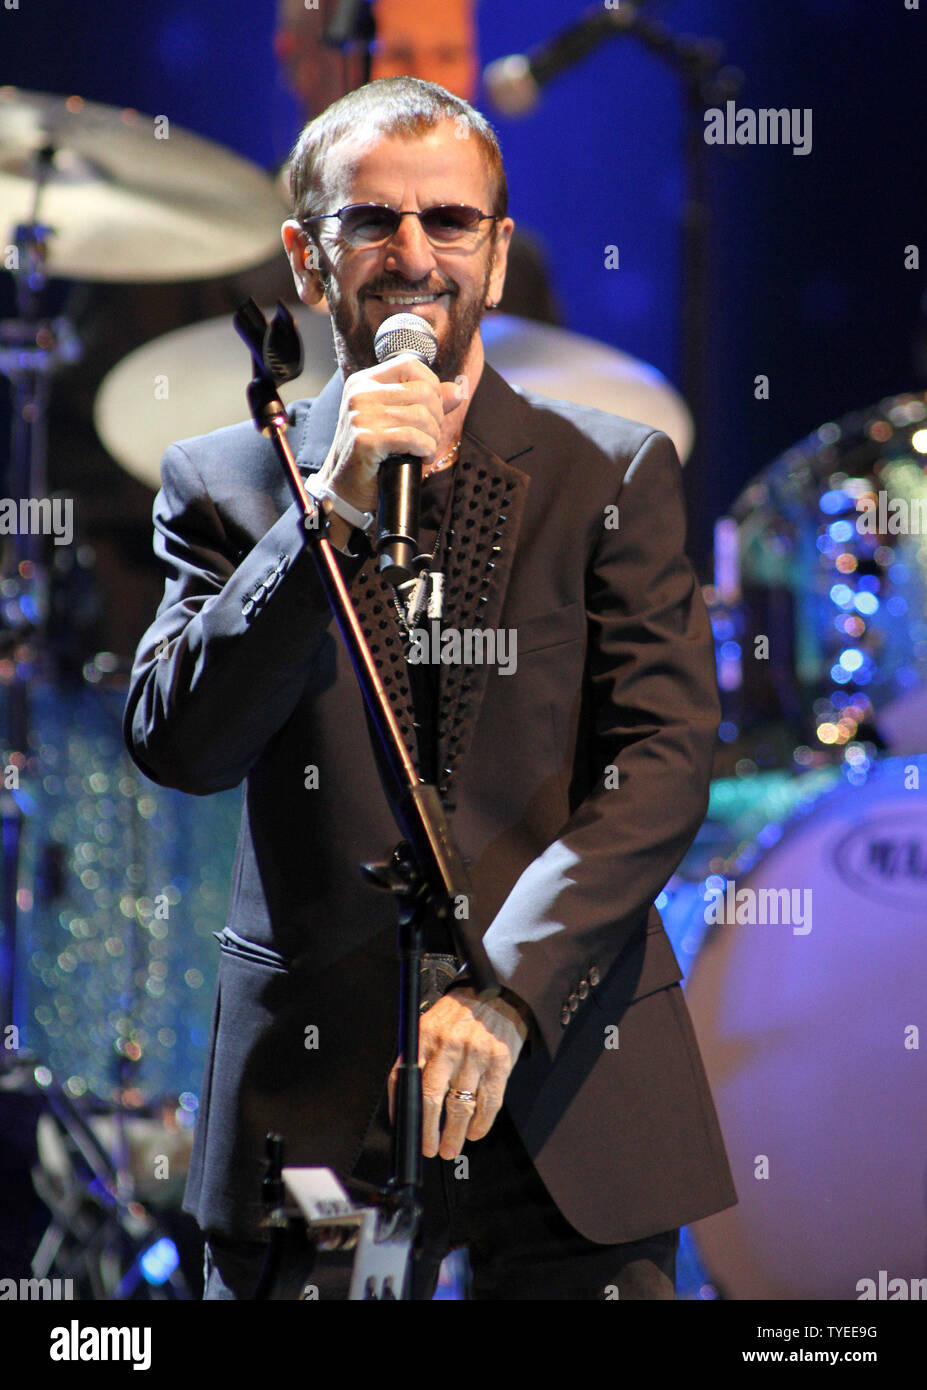 Ringo Starr performs at the Seminole Hard Rock Hotel and Casino in Hollywood, Florida on June 30, 2012. UPI/Michael Bush Stock Photo